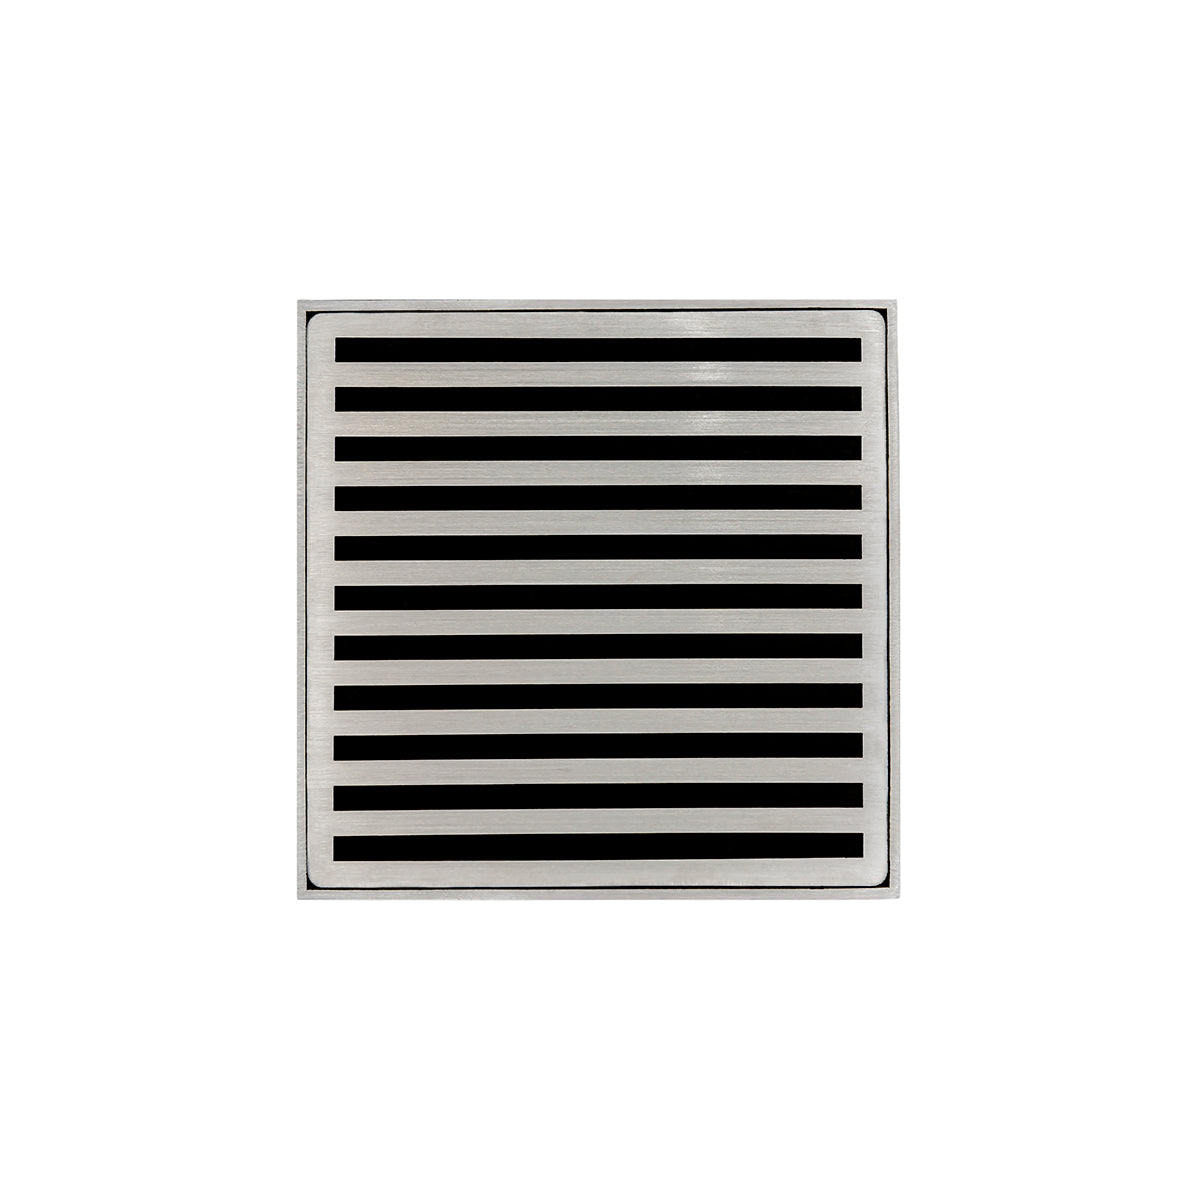 Infinity Drain 5" x 5" ND 5 High Flow Premium Center Drain Kit with Lines Pattern Decorative Plate with ABS Drain Body, 3" Outlet